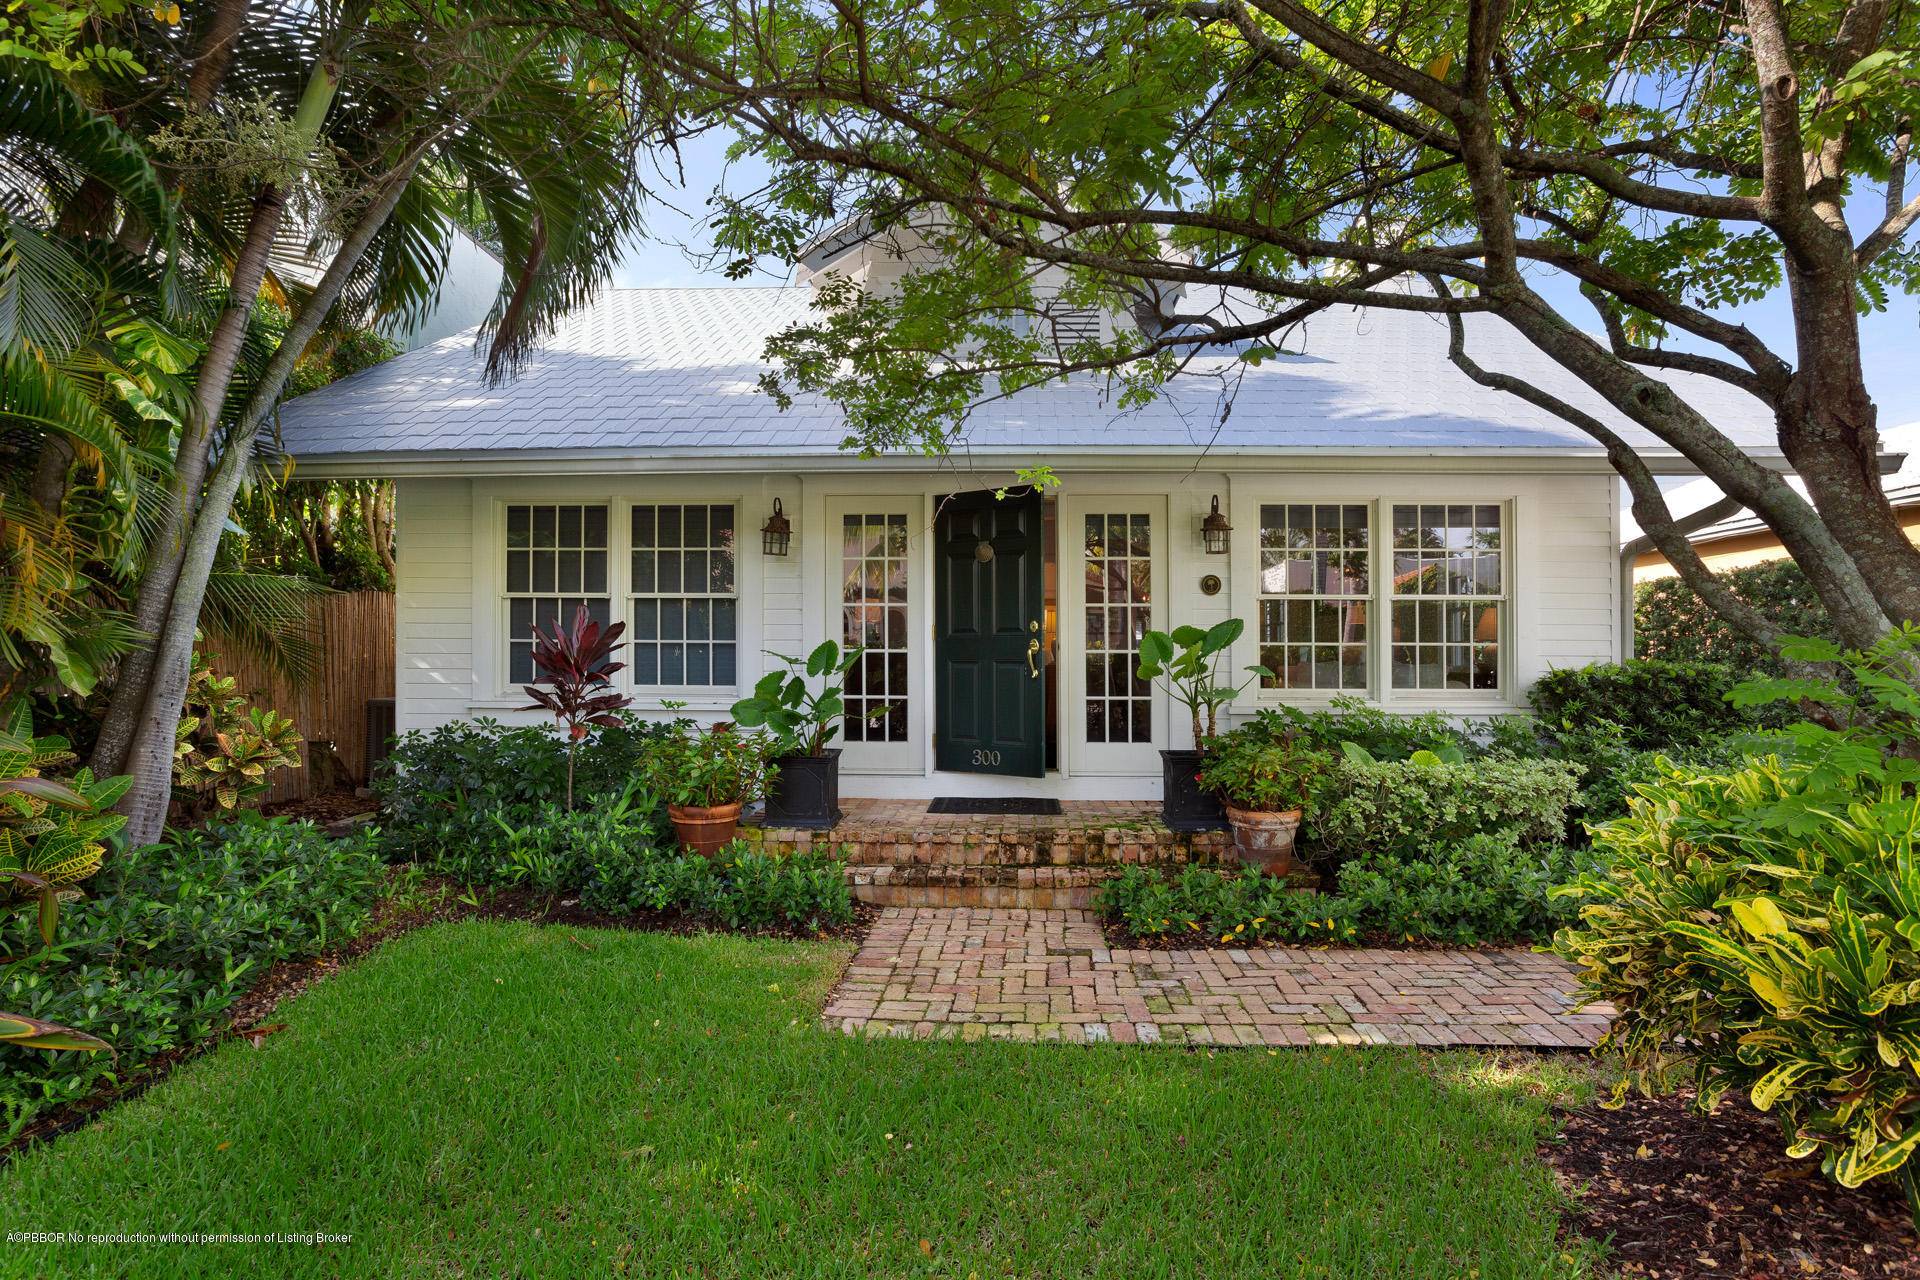 Newly renovated 1925 cottage in a prime area of midtown on one of the ''Sea'' streets.